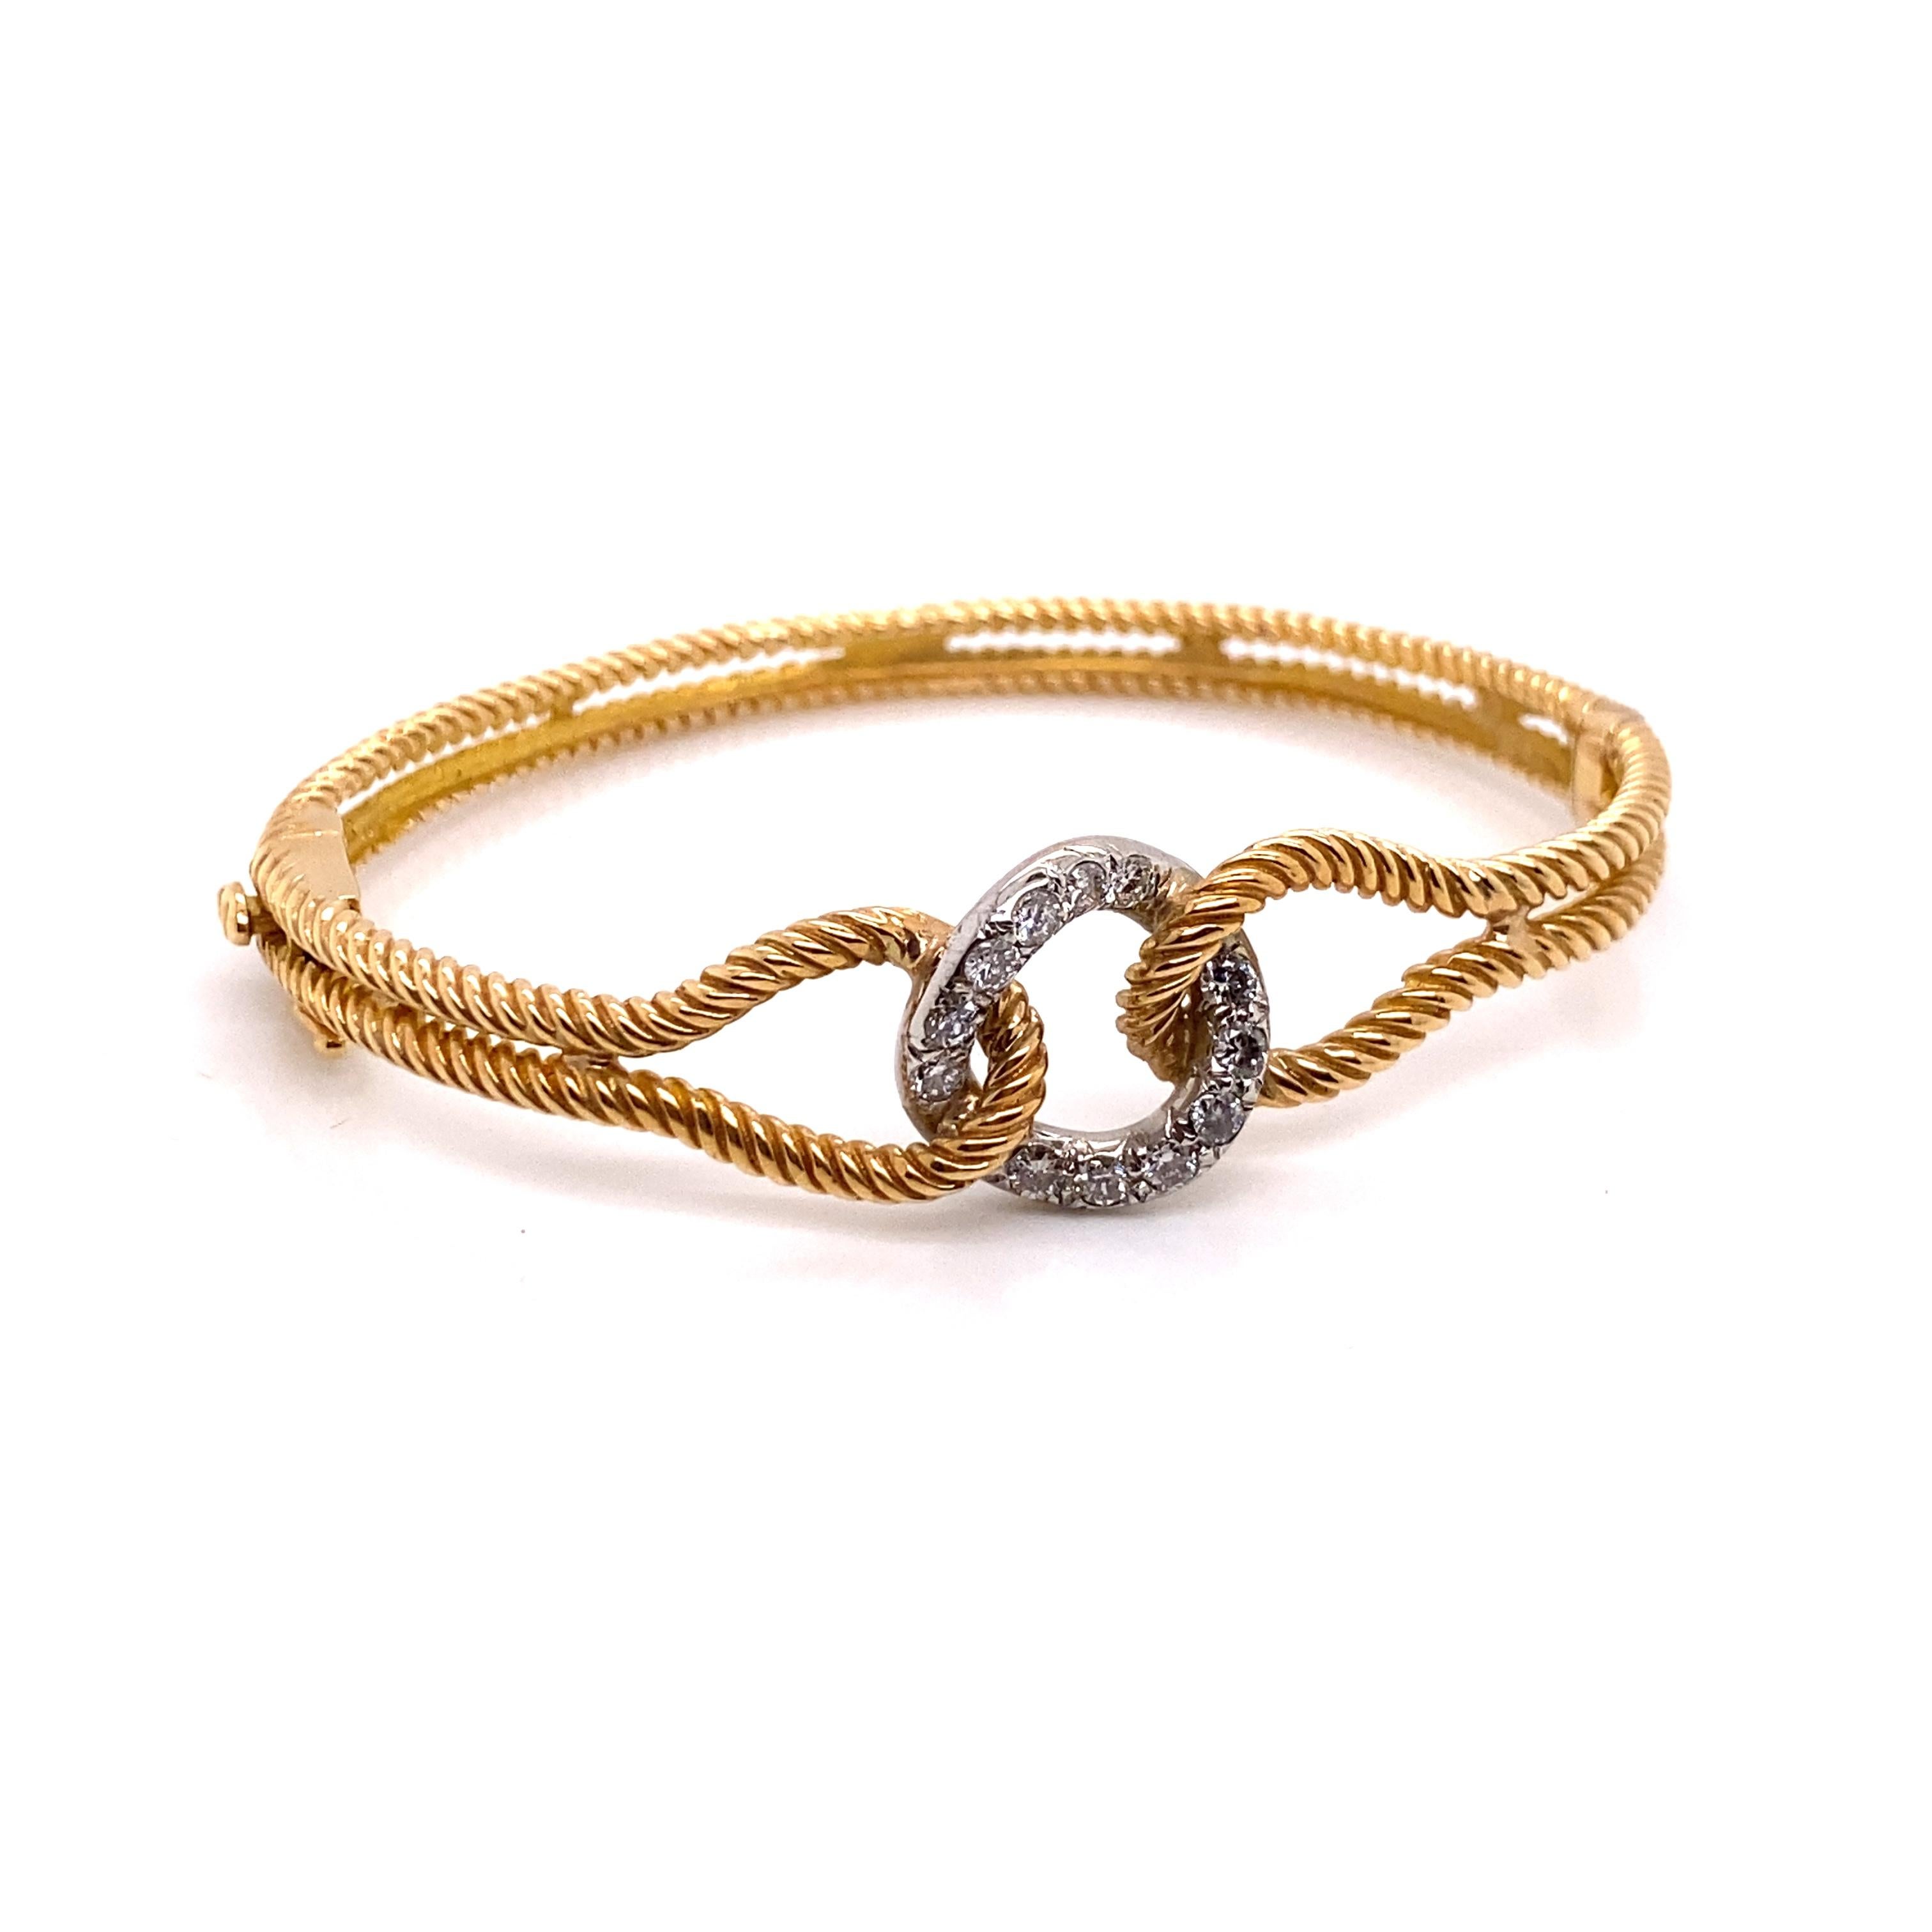 Vintage 14K Yellow Gold Cable Lasso Bangle with Diamond Center - The white gold center piece contains 12 round brilliant diamonds with a total approximate weight of .50ct with G - I color and SI clarity. The bangle measures 15.3mm on top and tapers